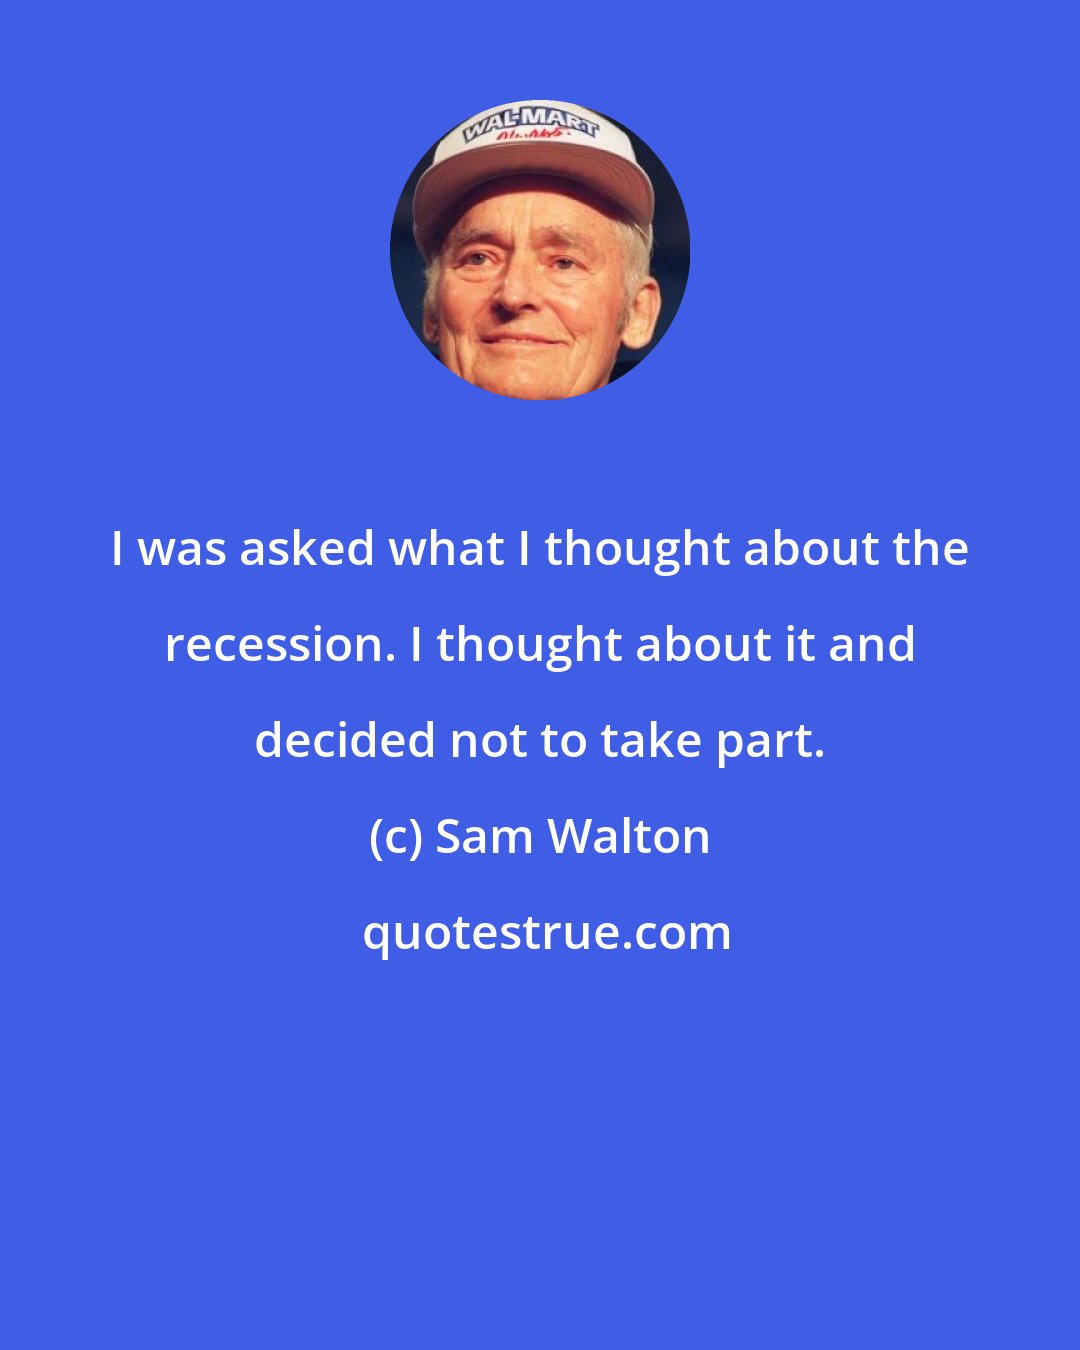 Sam Walton: I was asked what I thought about the recession. I thought about it and decided not to take part.